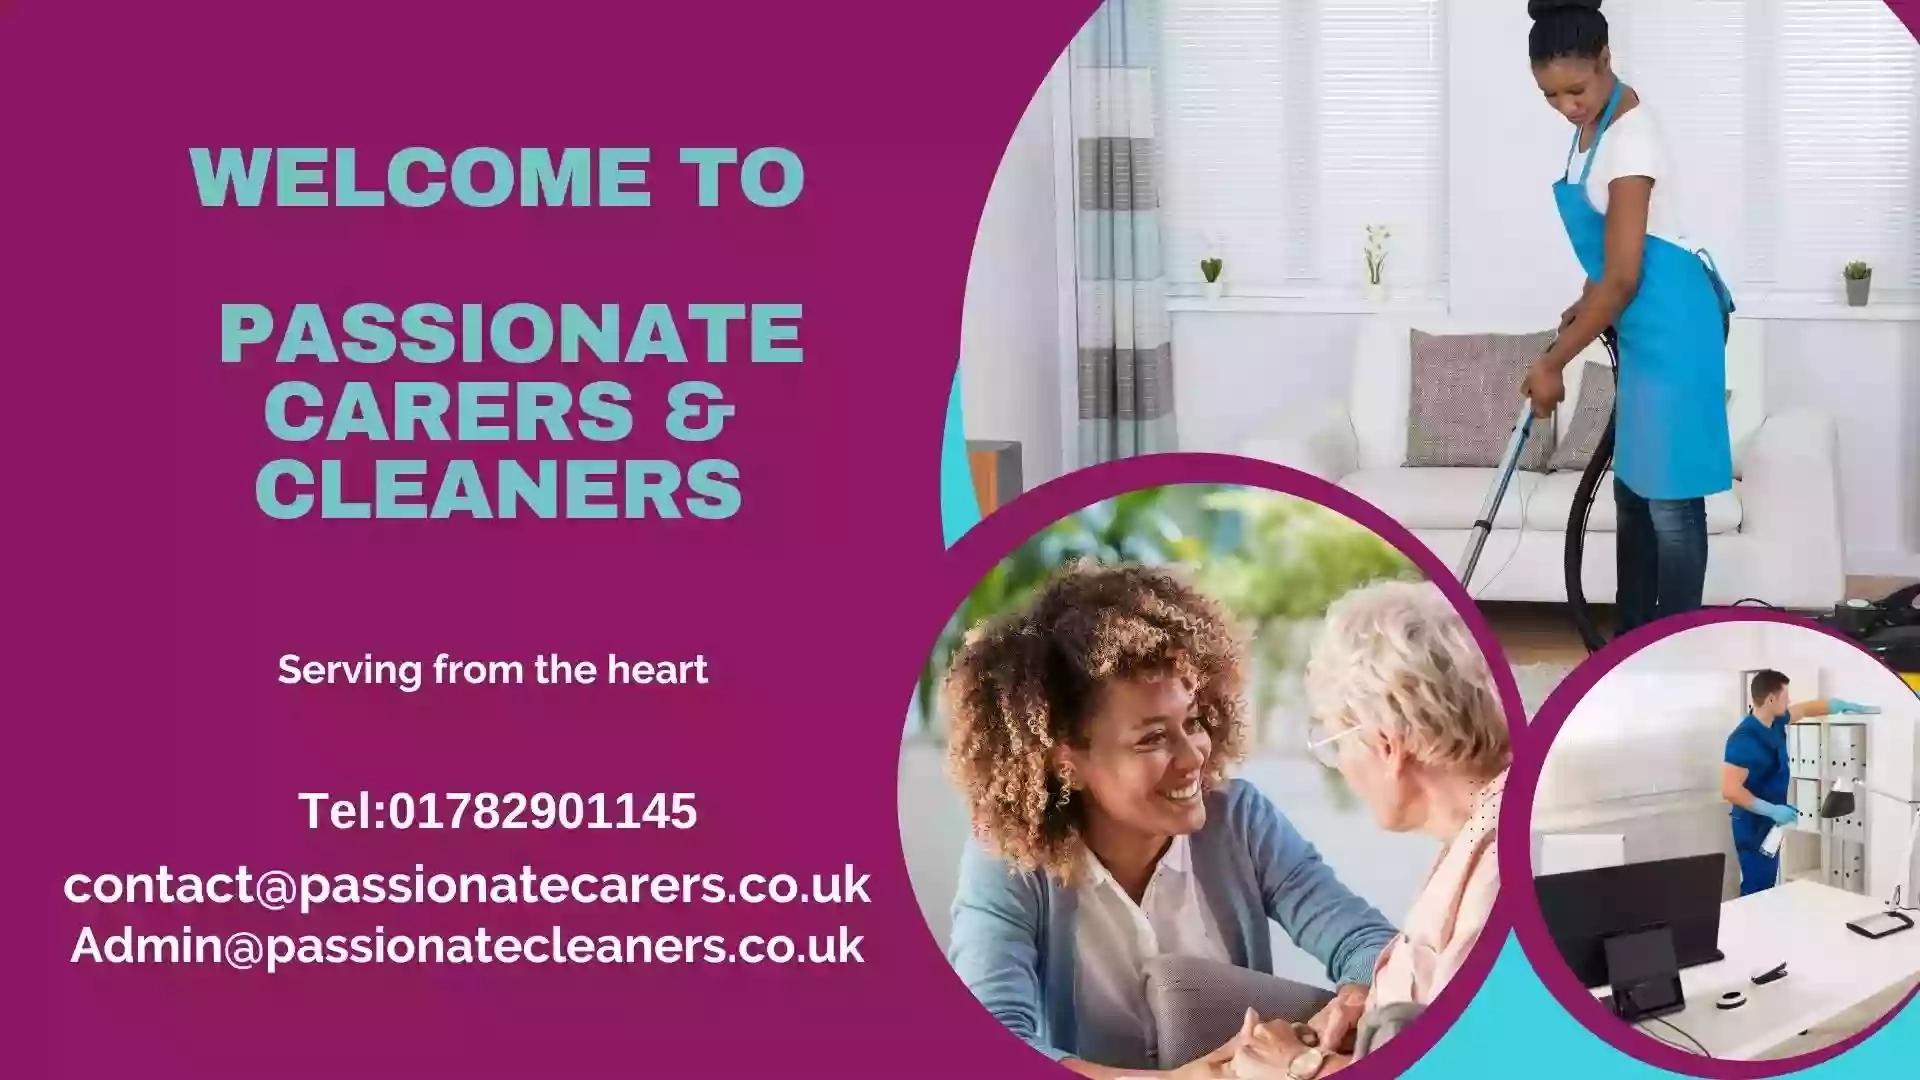 Passionate Carers & Cleaners Ltd